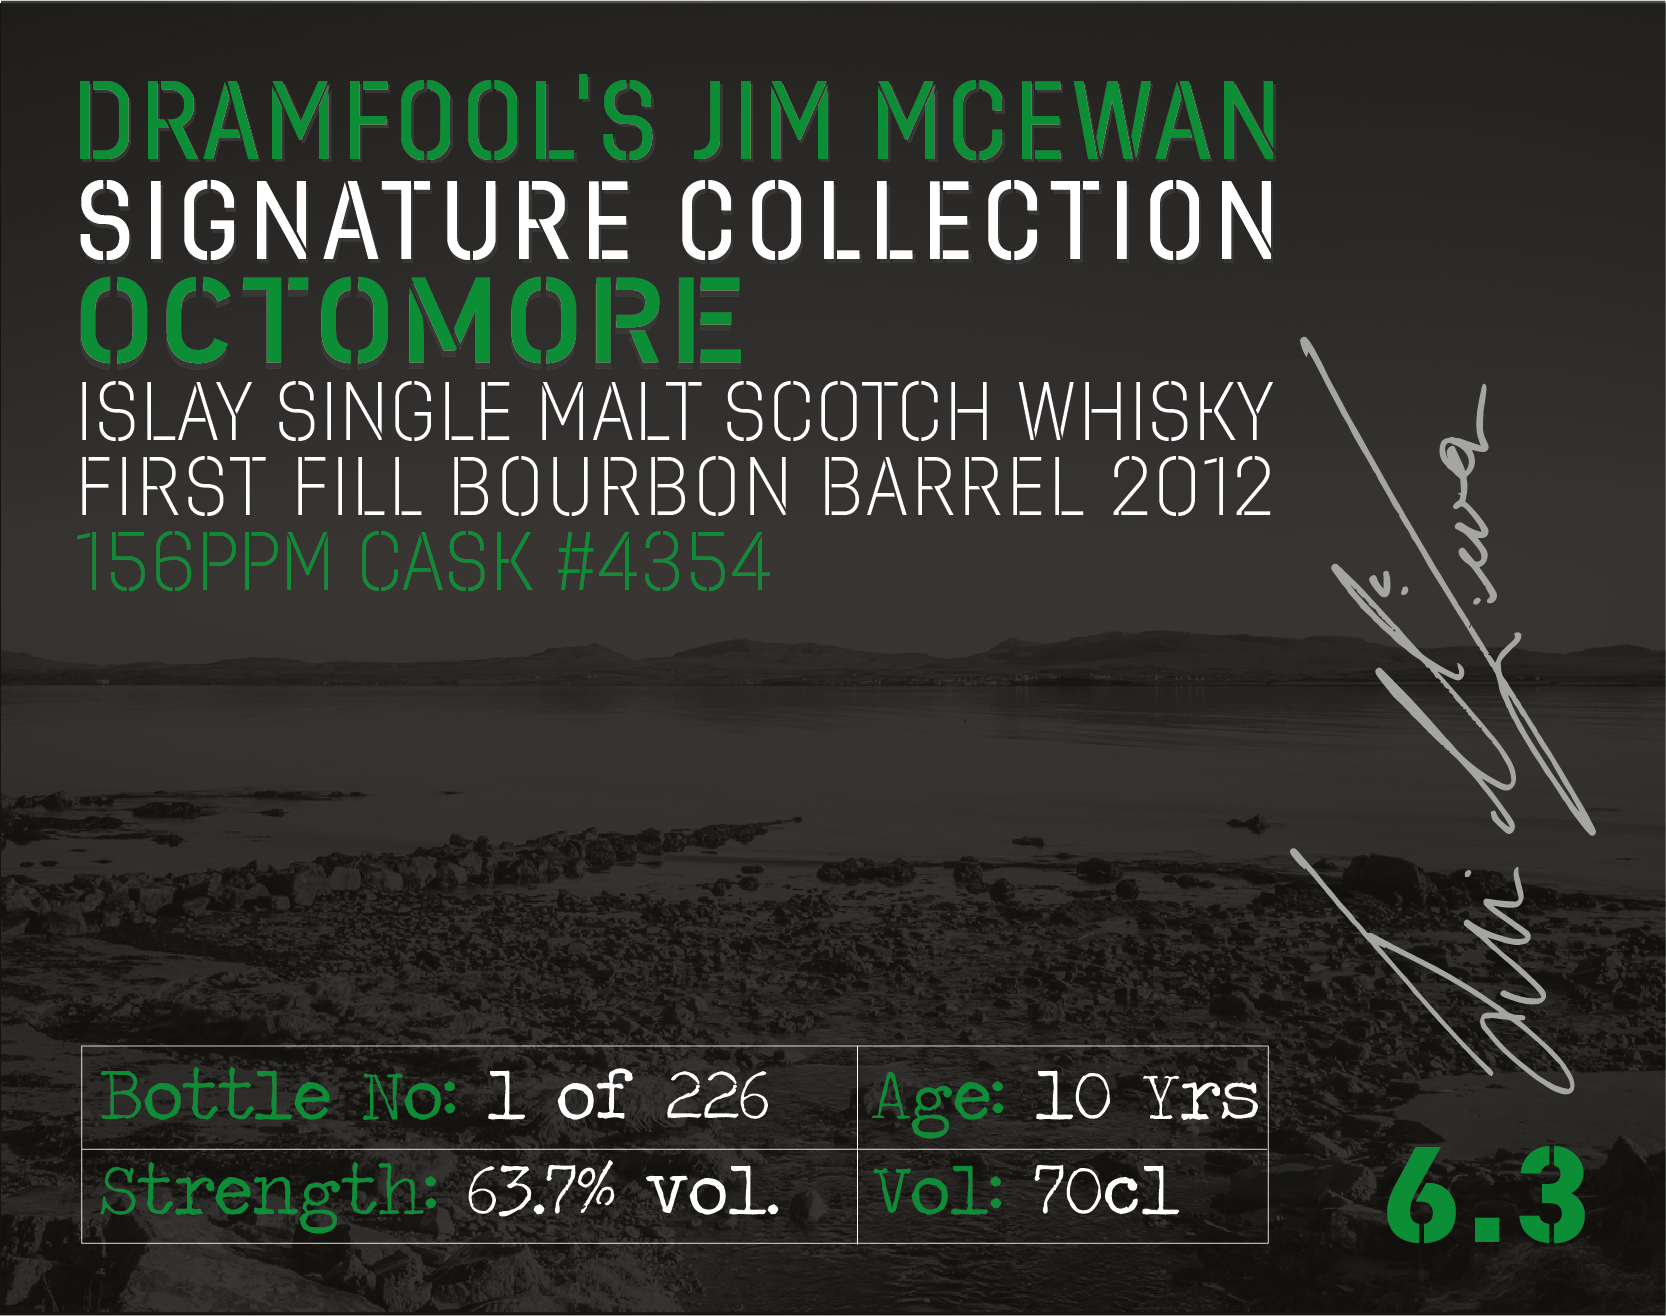 Jim McEwan Signature Collection 6.3, Octomore 2012 10 years old - Whiskylander